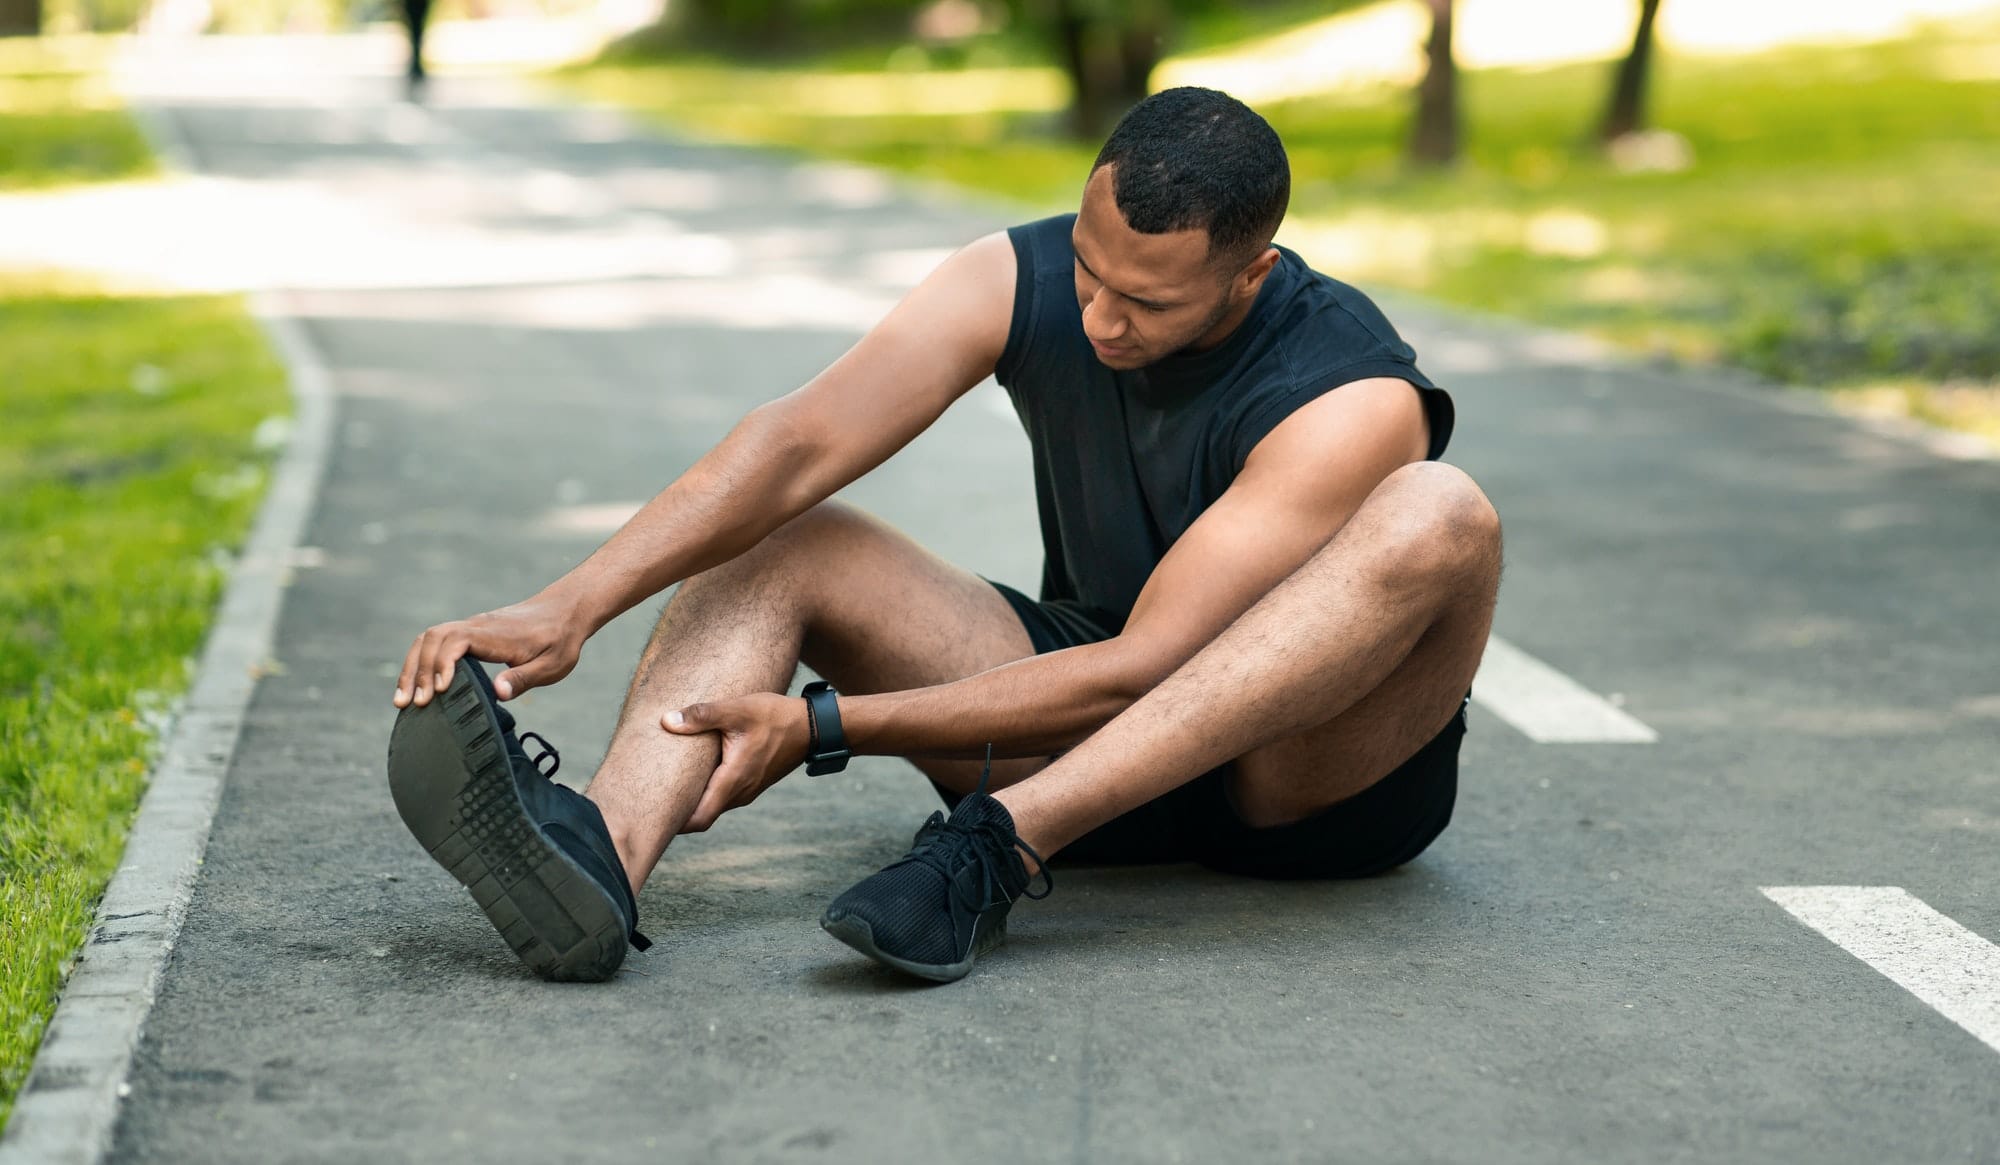 Sports injury. African American runner sitting on jogging track and feeling pain in his ankle